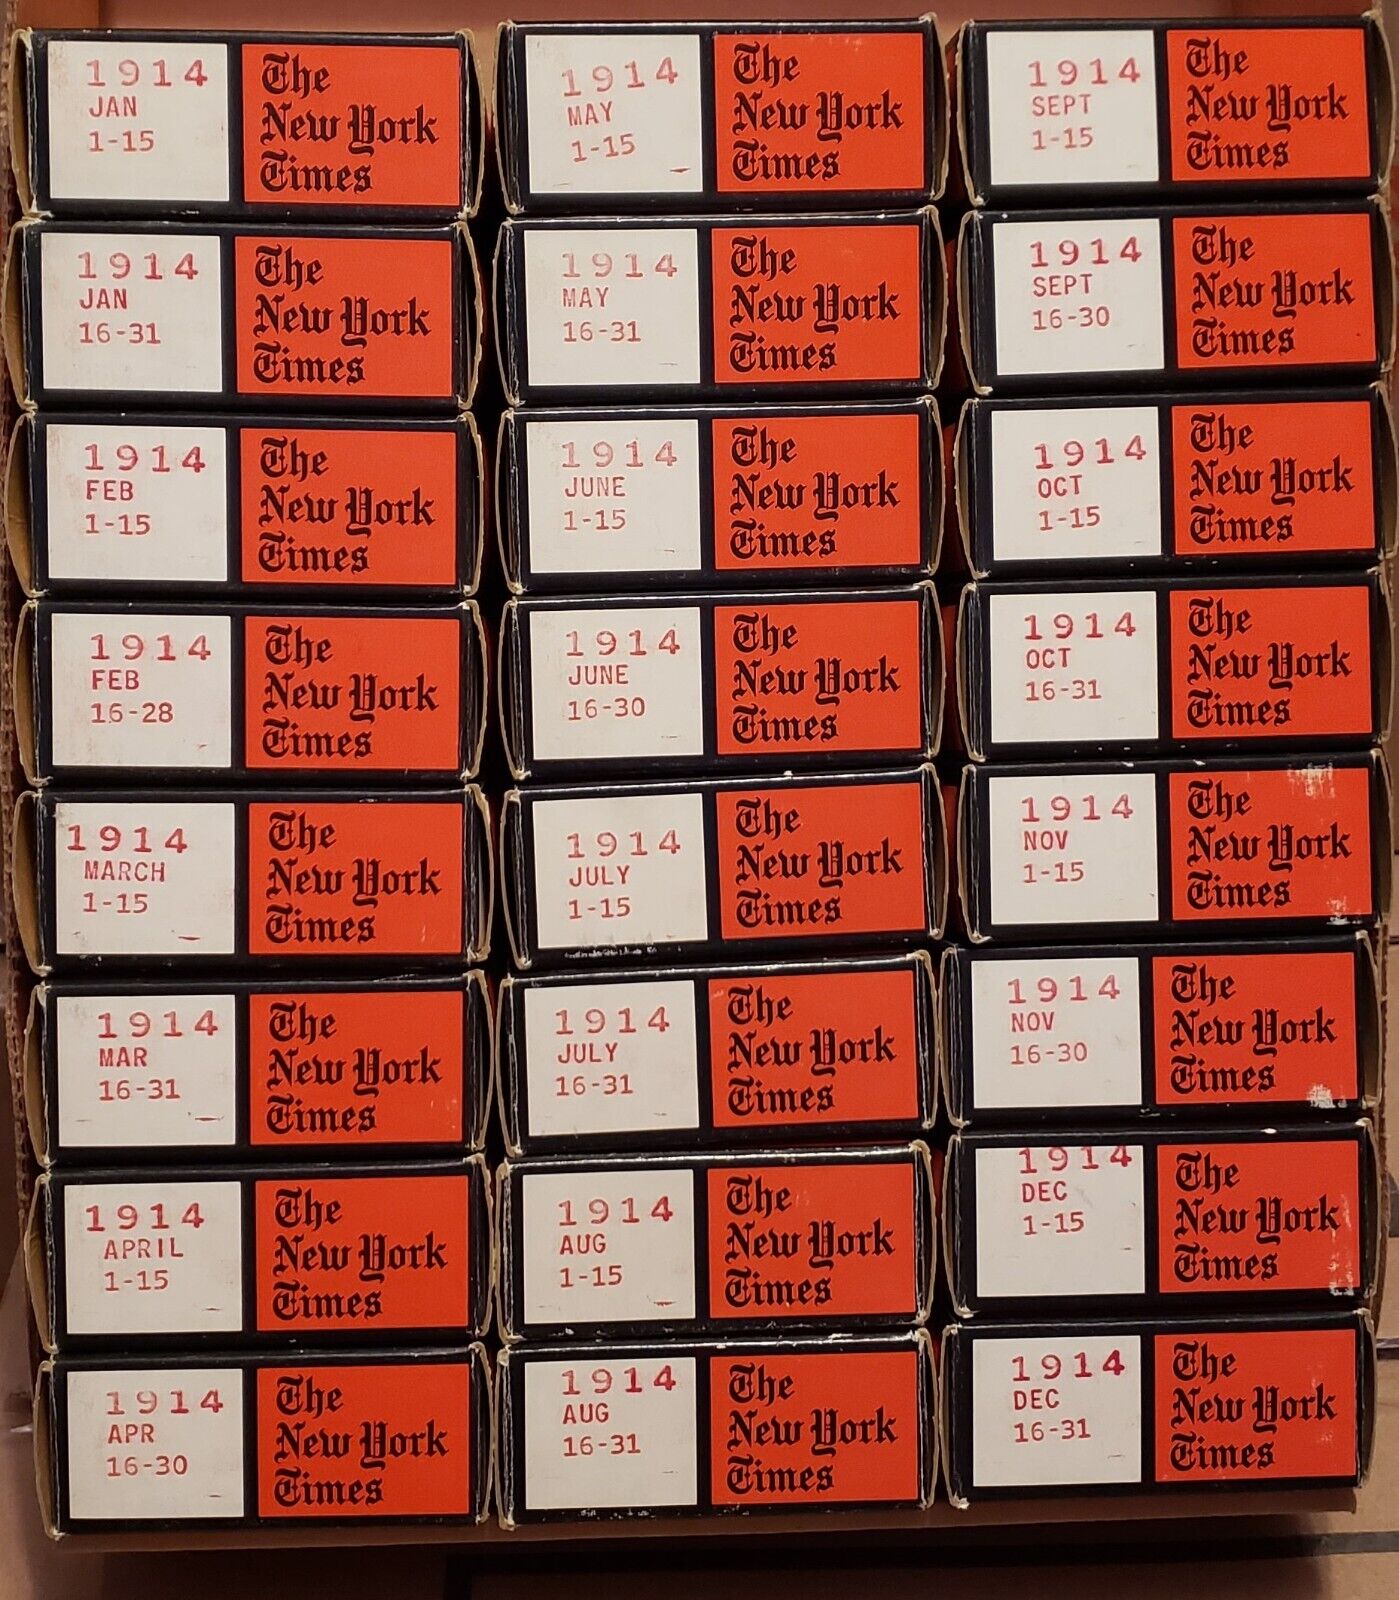 1 Full Year of New York Times on Microfilm. Choose From Years 1914 thru 2008